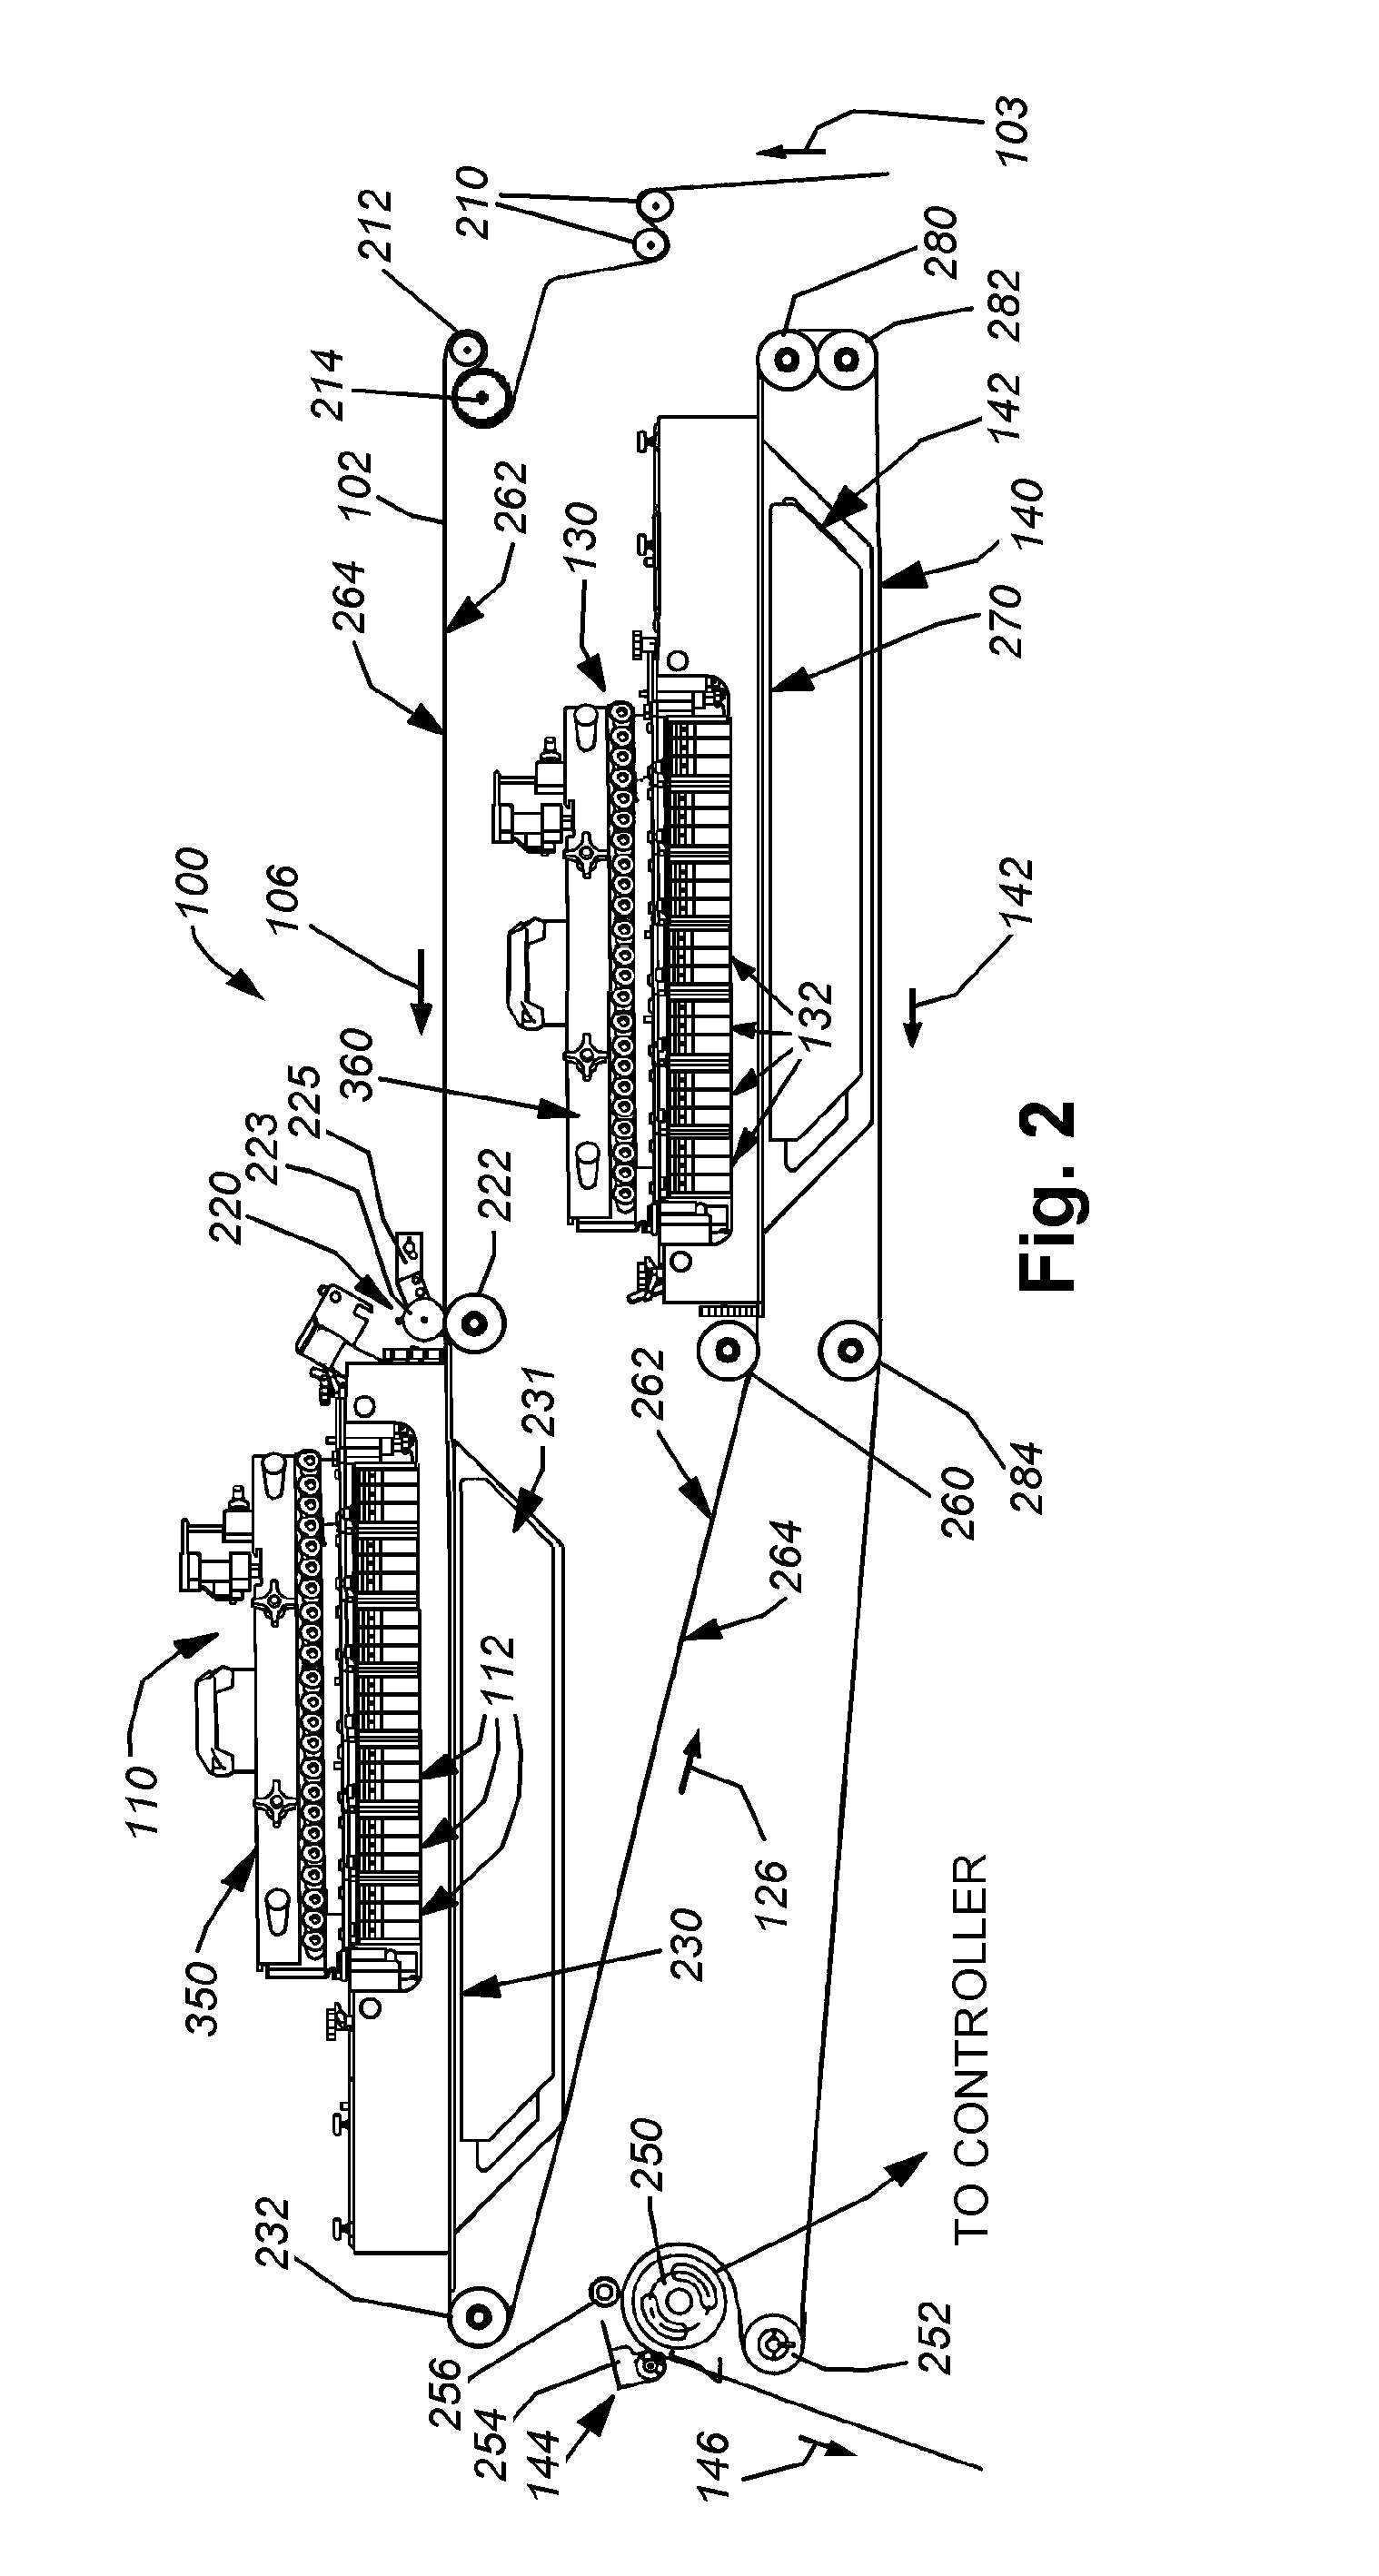 System and method for printing a continuous web employing a plurality of interleaved ink-jet pens fed by a bulk ink source